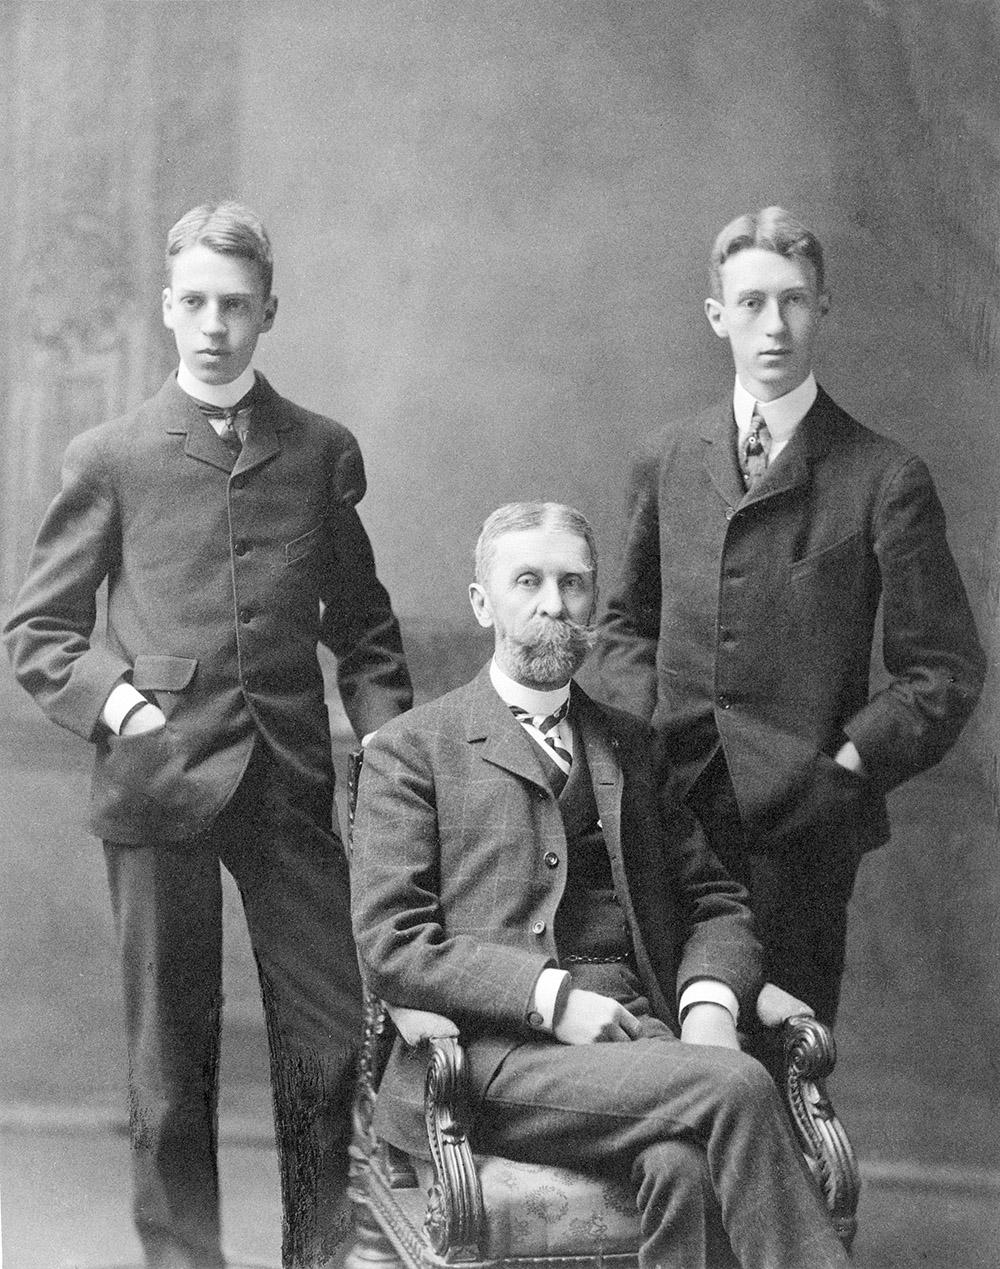 Duncan and James Phillips with their father, Major D.C. Phillips, c. 1900.